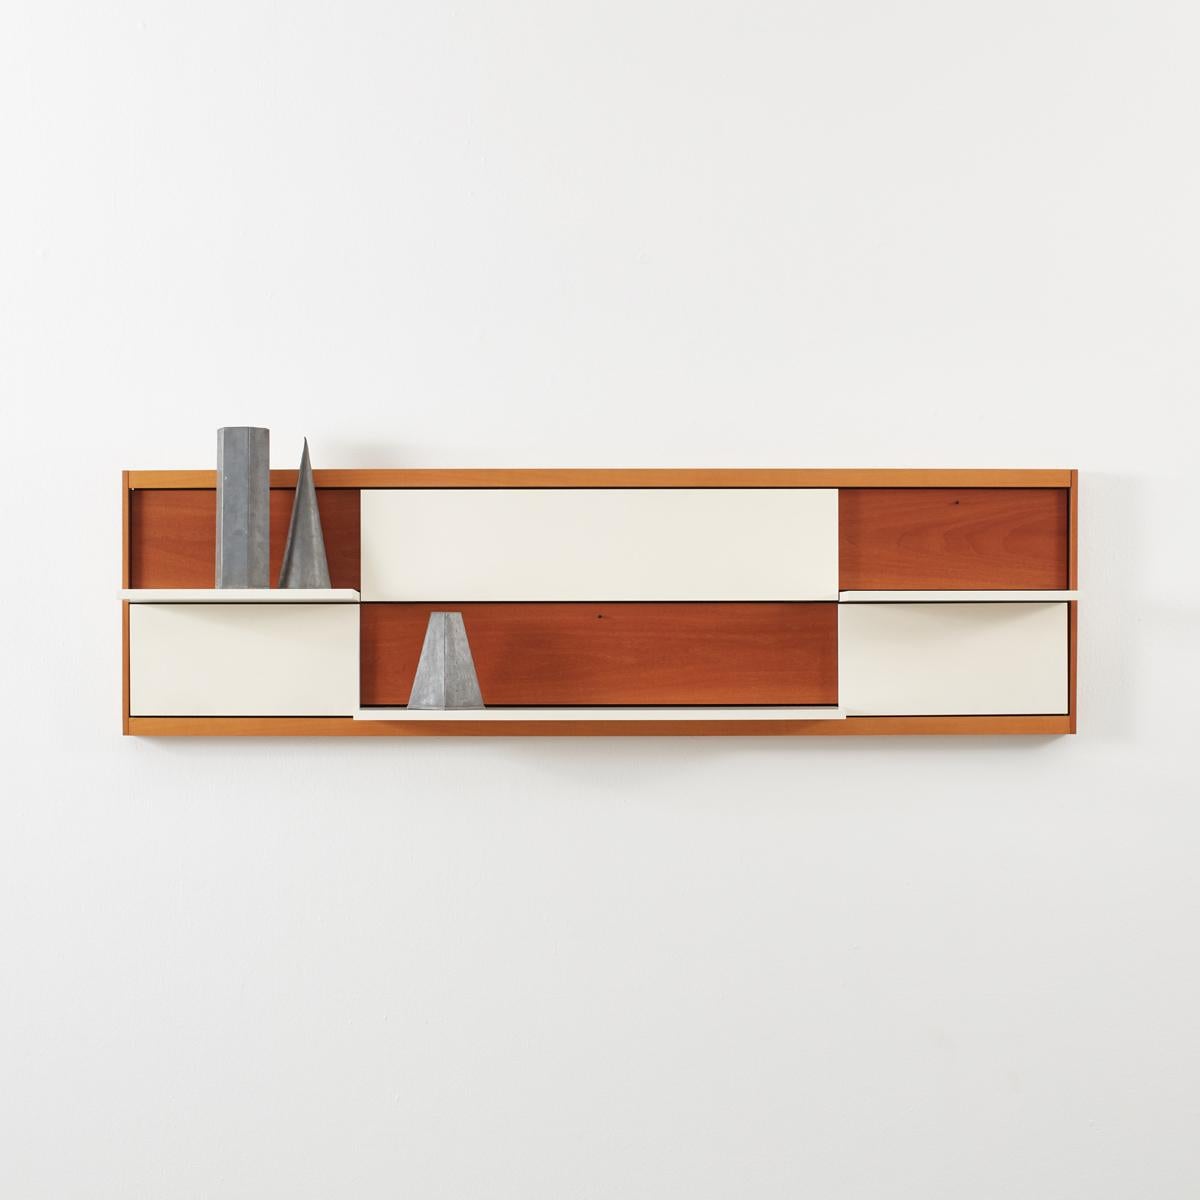 Luca Meda Shelving Unit, Molteni, Italy, c1970 In Good Condition For Sale In London, GB